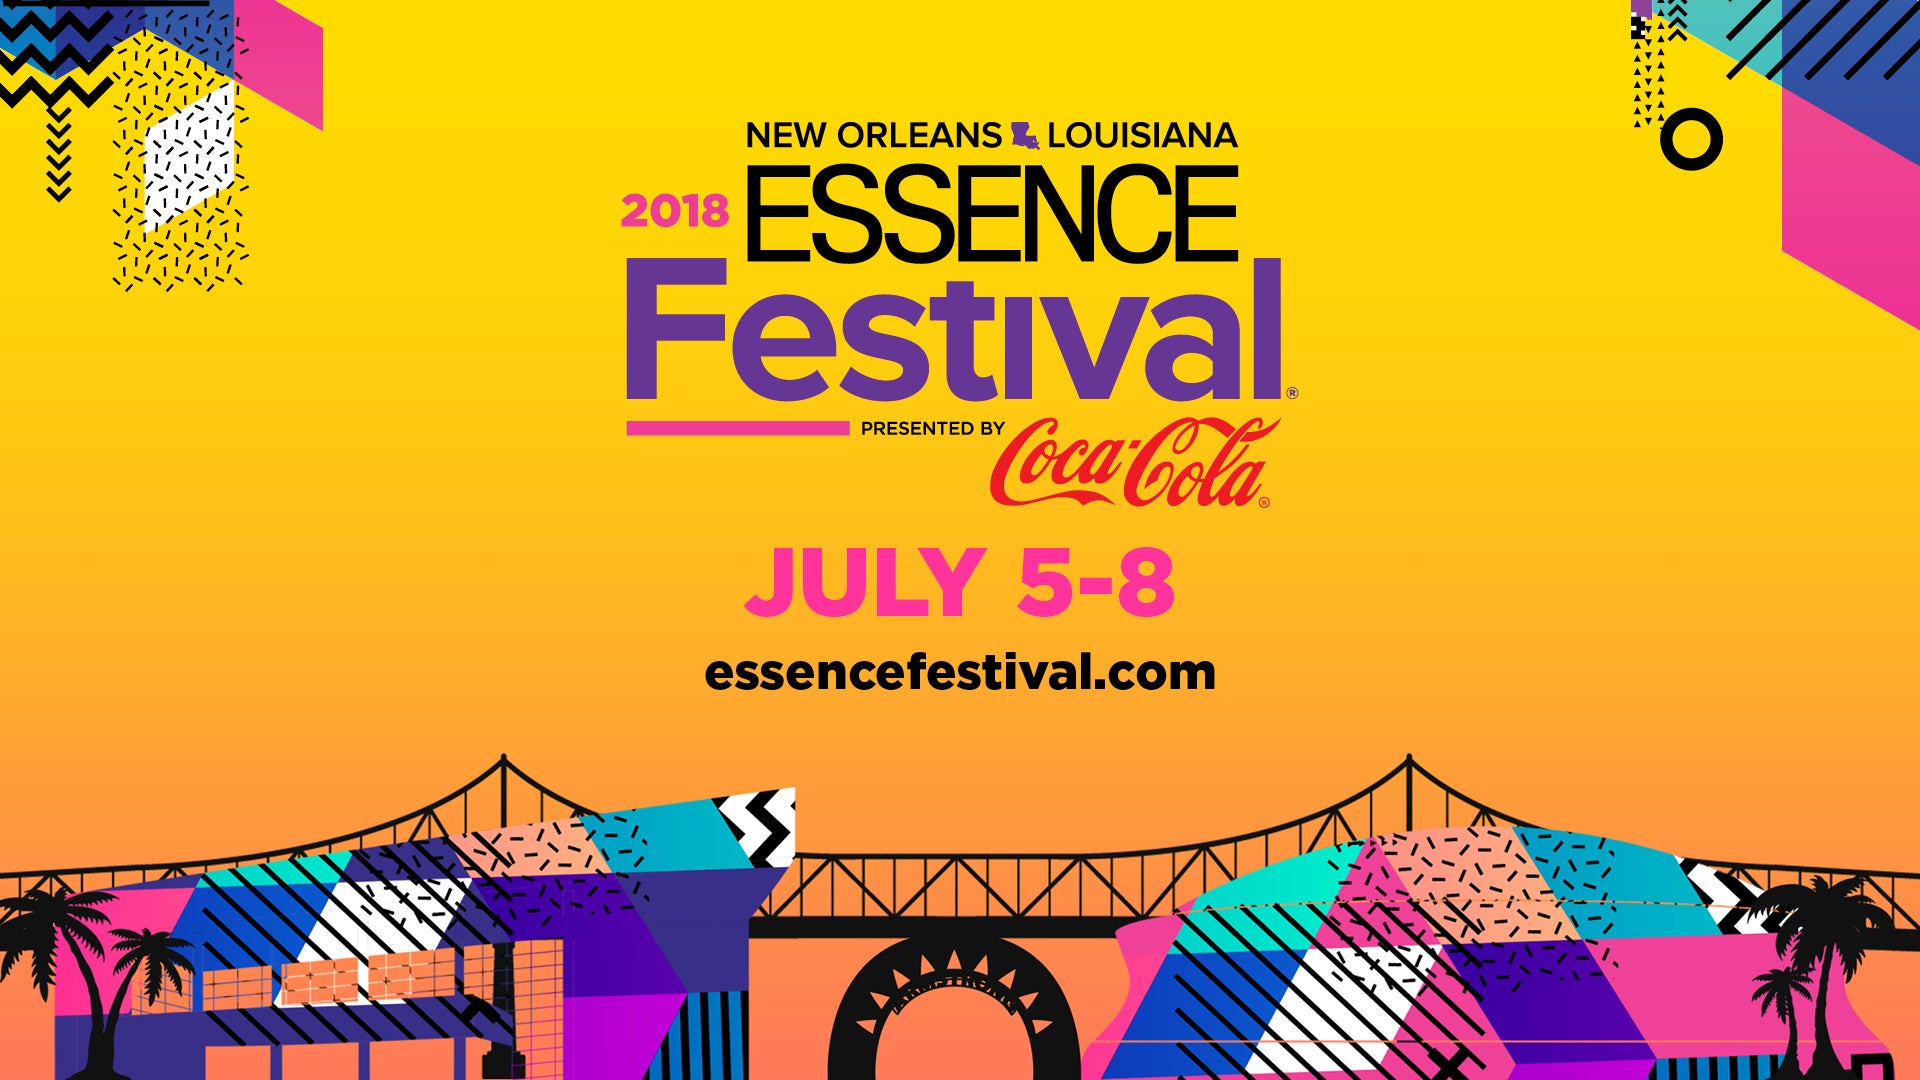 ESSENCE Fest 2018: America's Biggest Celebration Of Black Women Is Back...Do You Have Your Tickets Yet?
